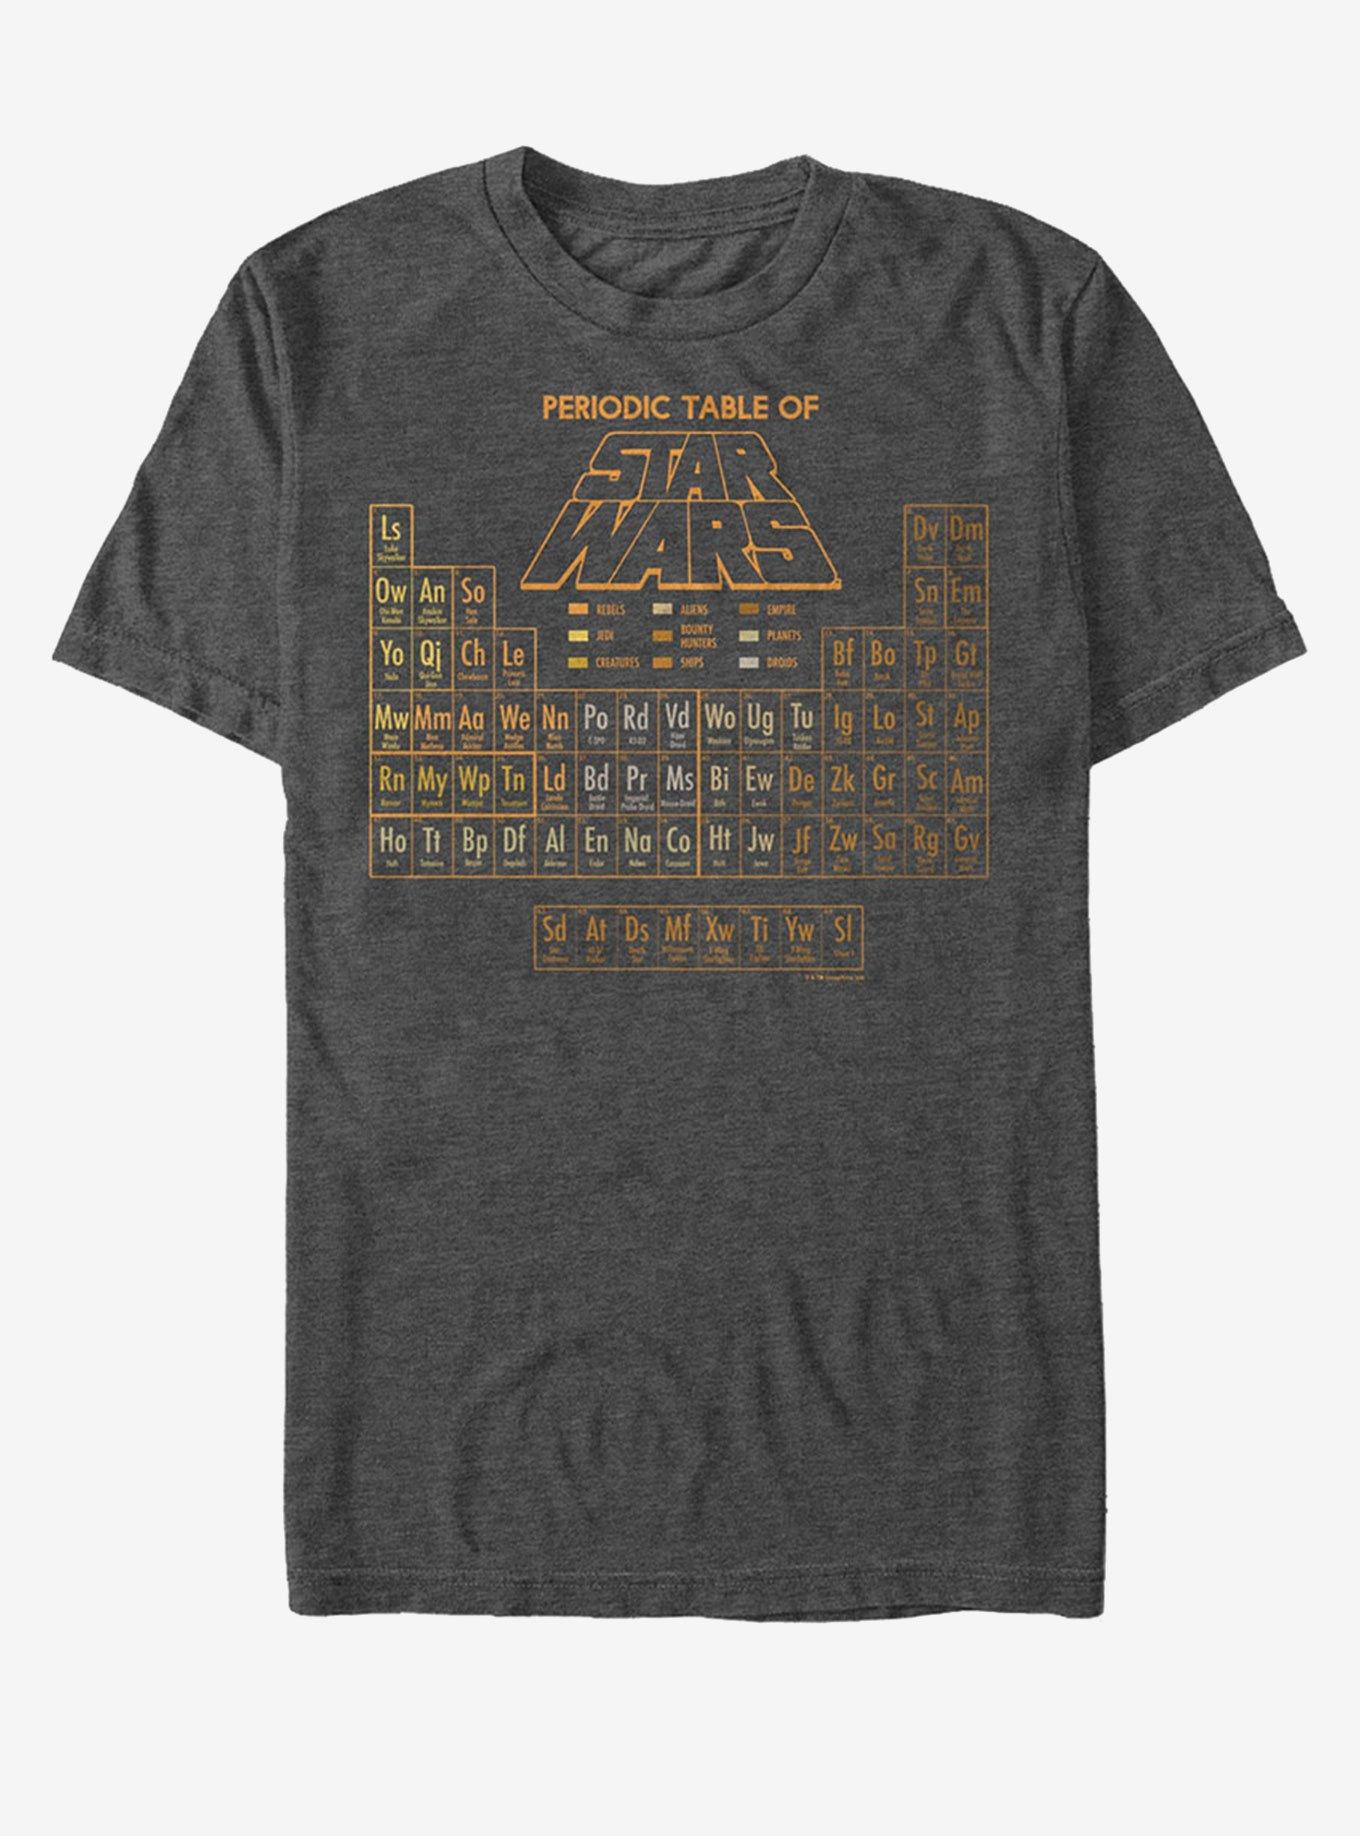 Star Wars Fade Periodic Table of Elements T-Shirt